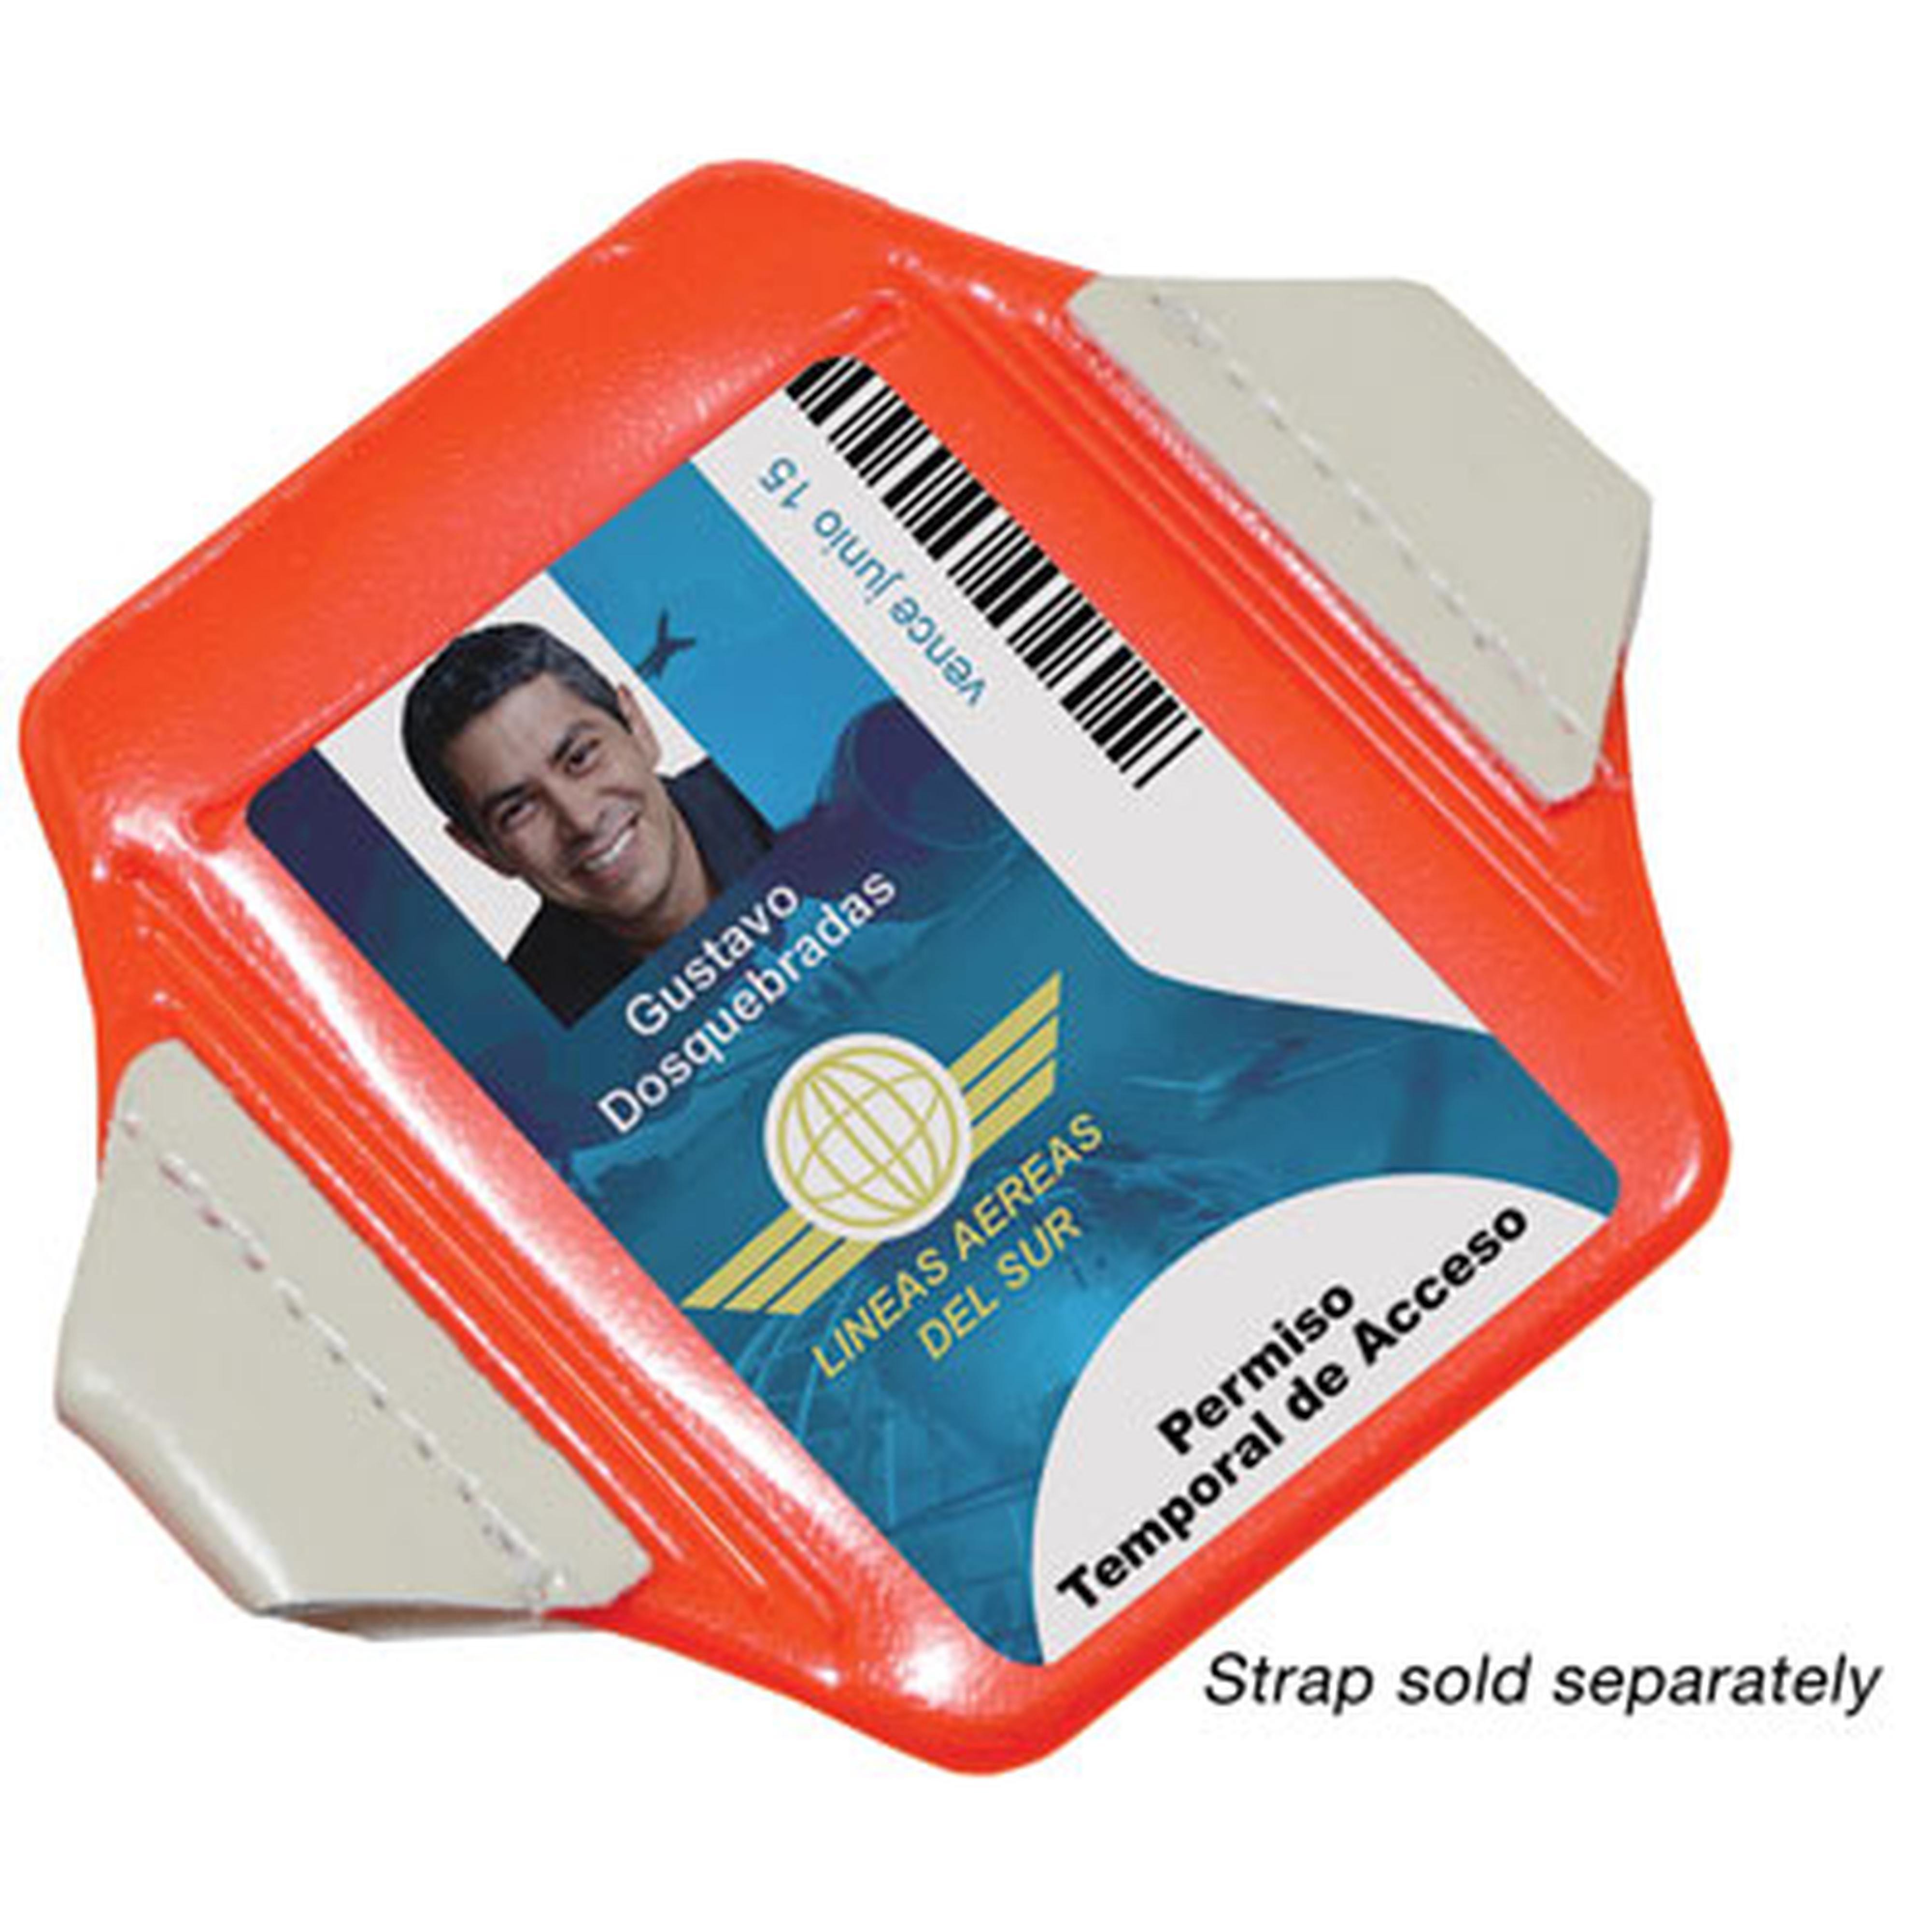 ID Badge Holder products for sale